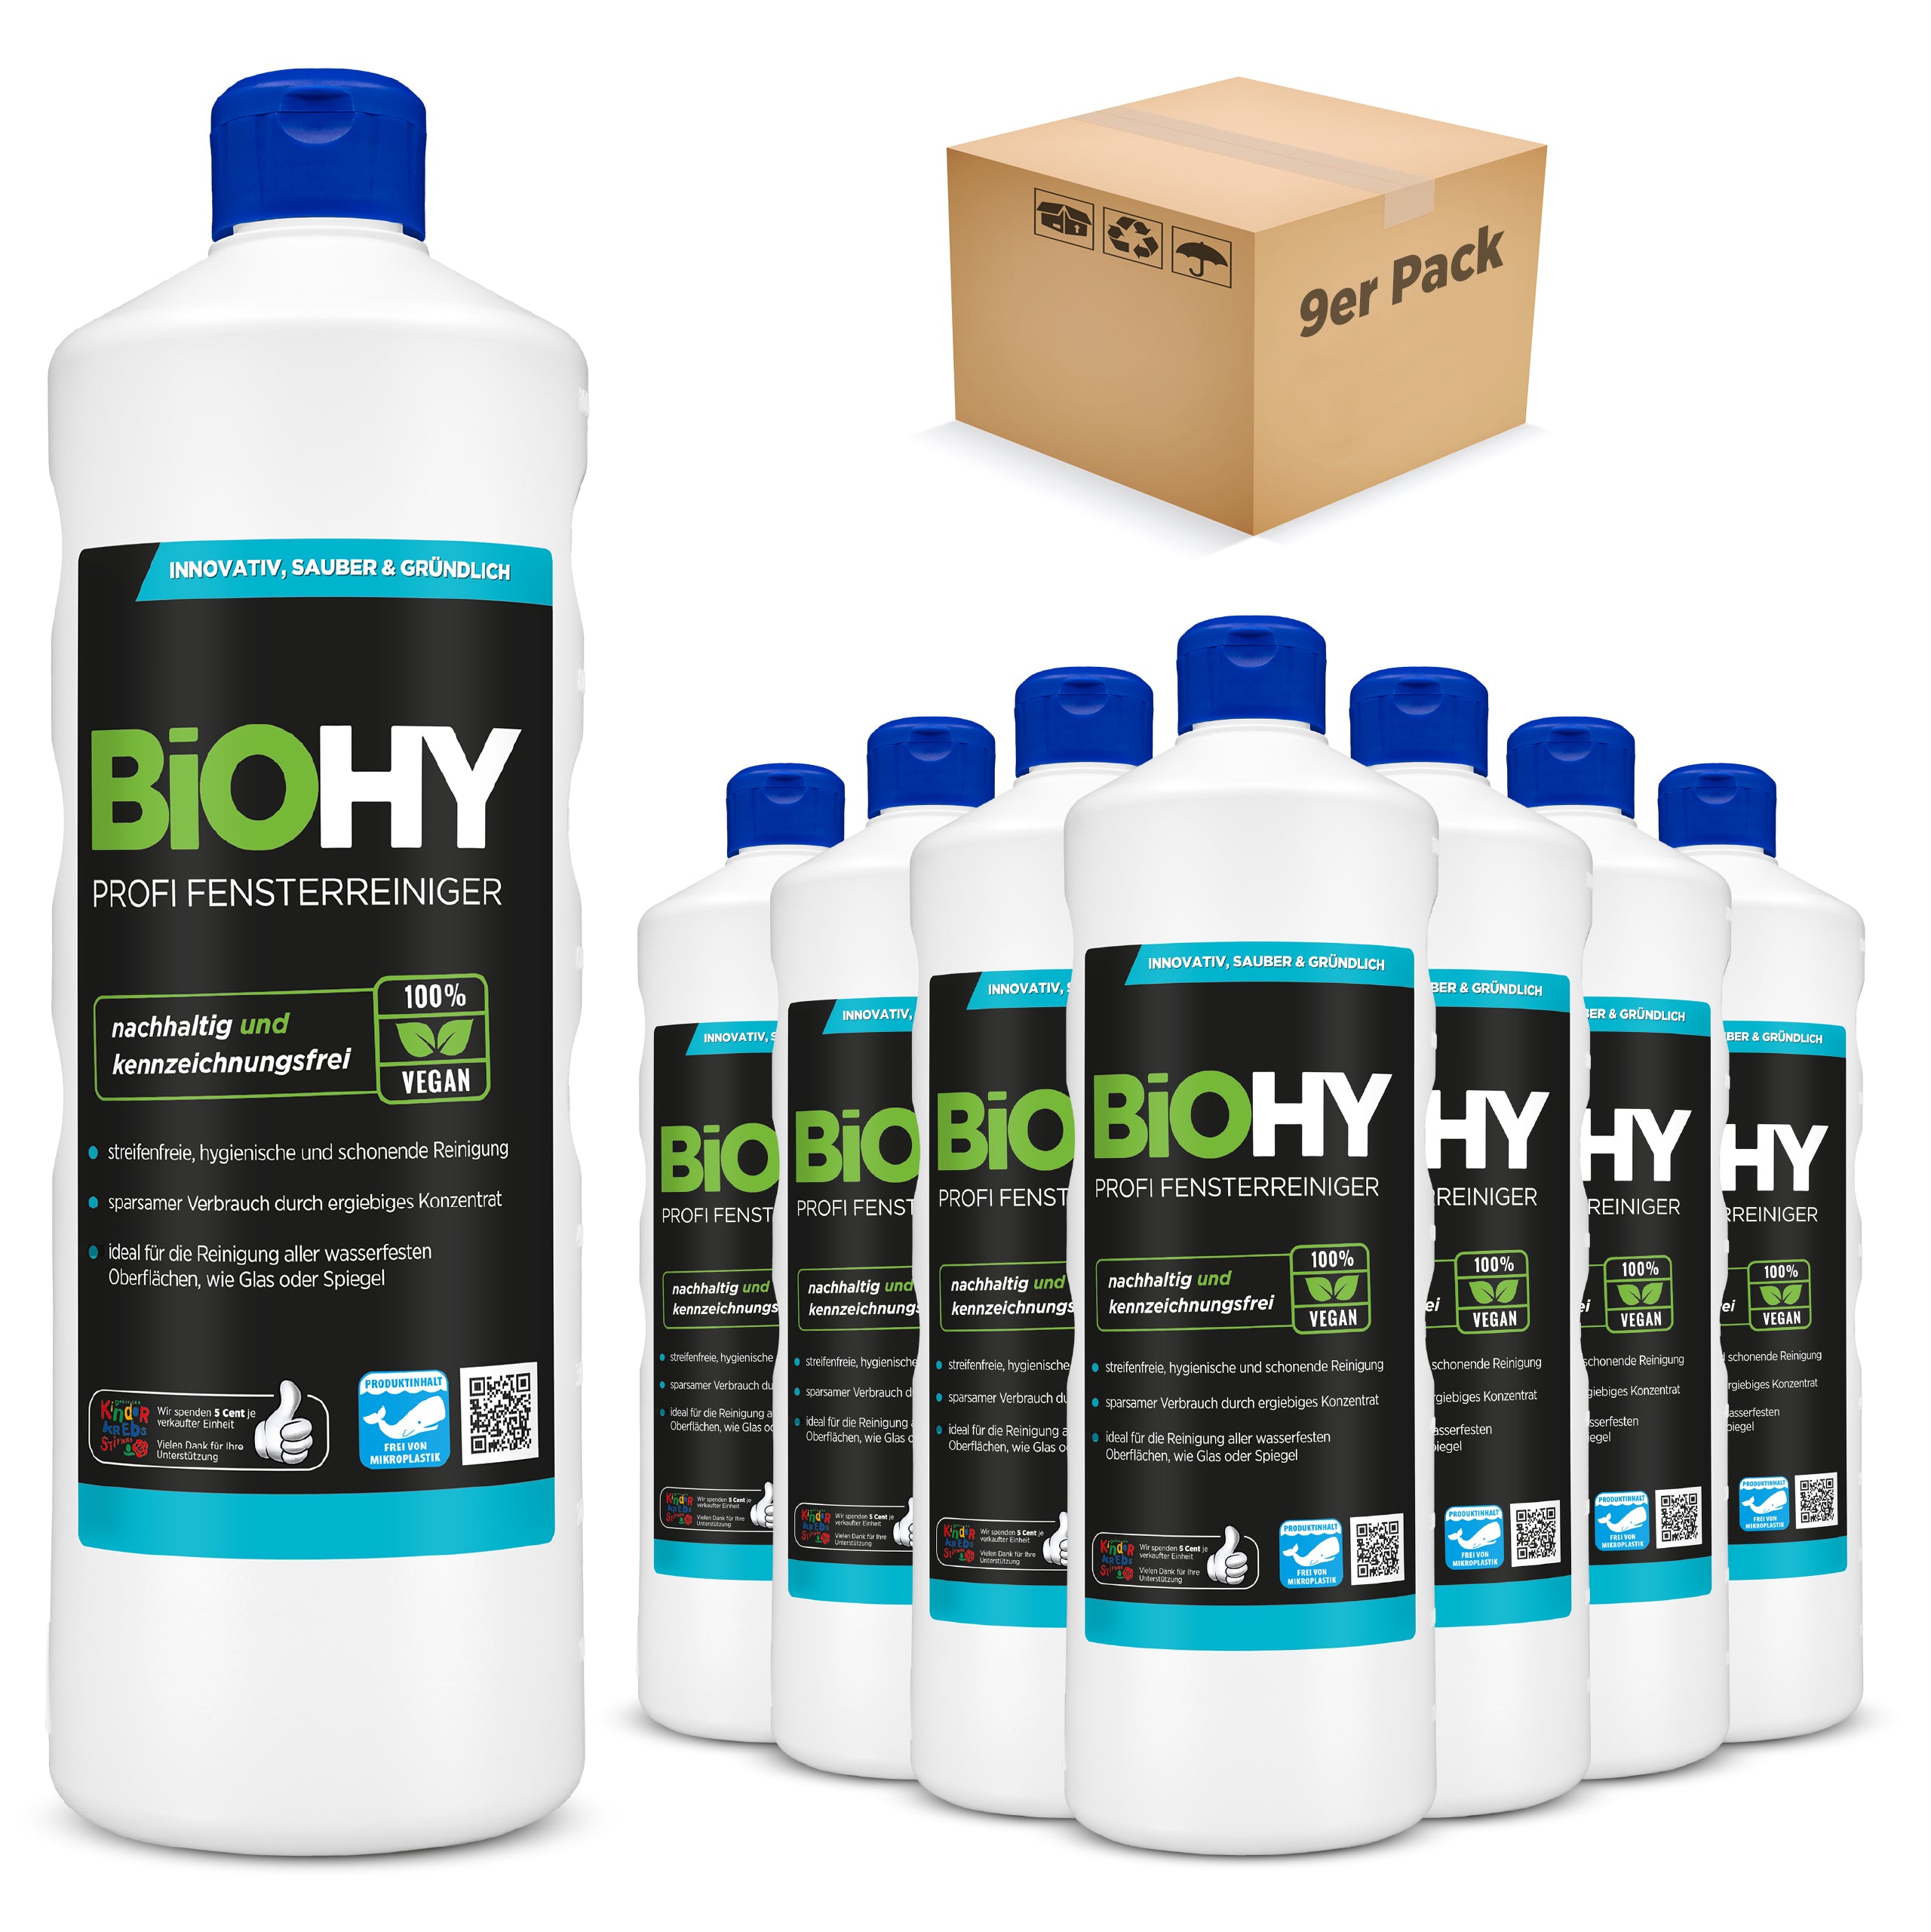 BiOHY professional window cleaner, glass cleaner, window cleaning agent, organic concentrate